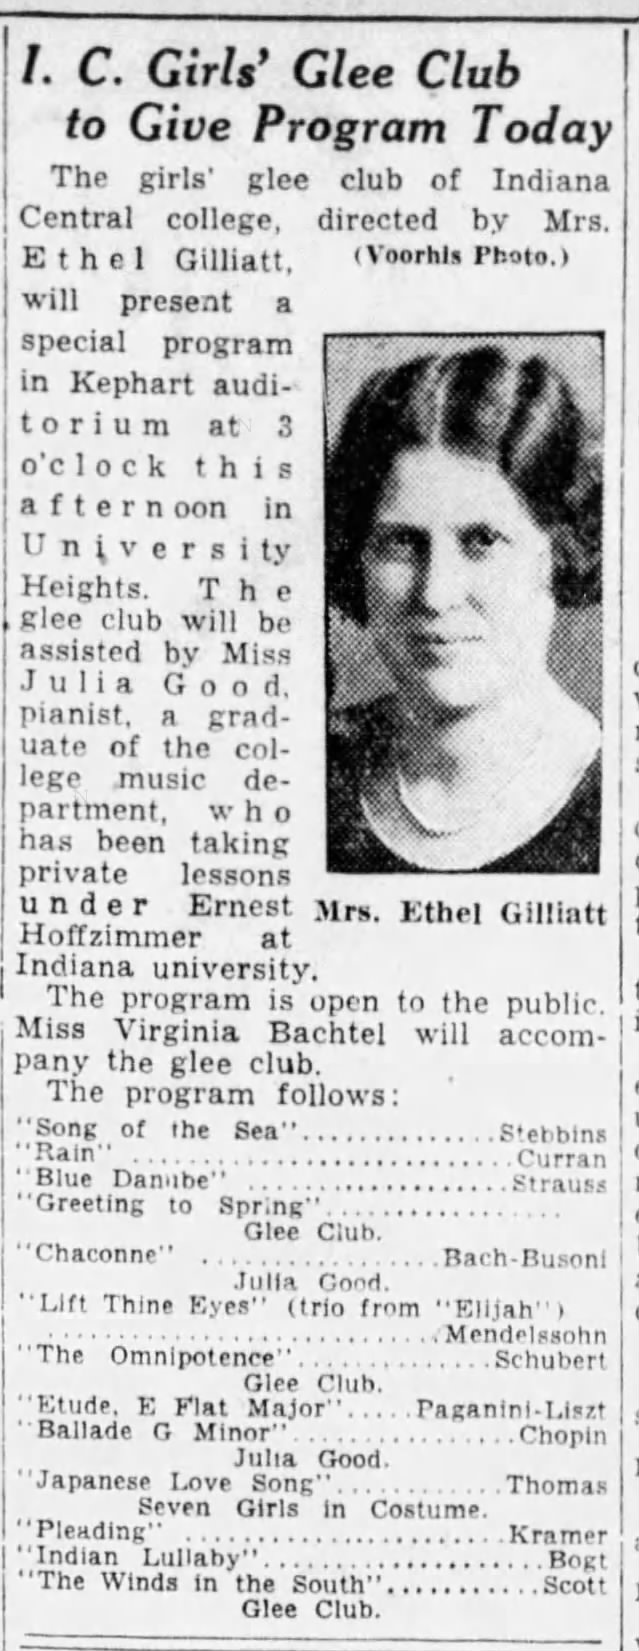 1932 Julia Good studied piano under Ernest Hoffzimmer at Indiana University.